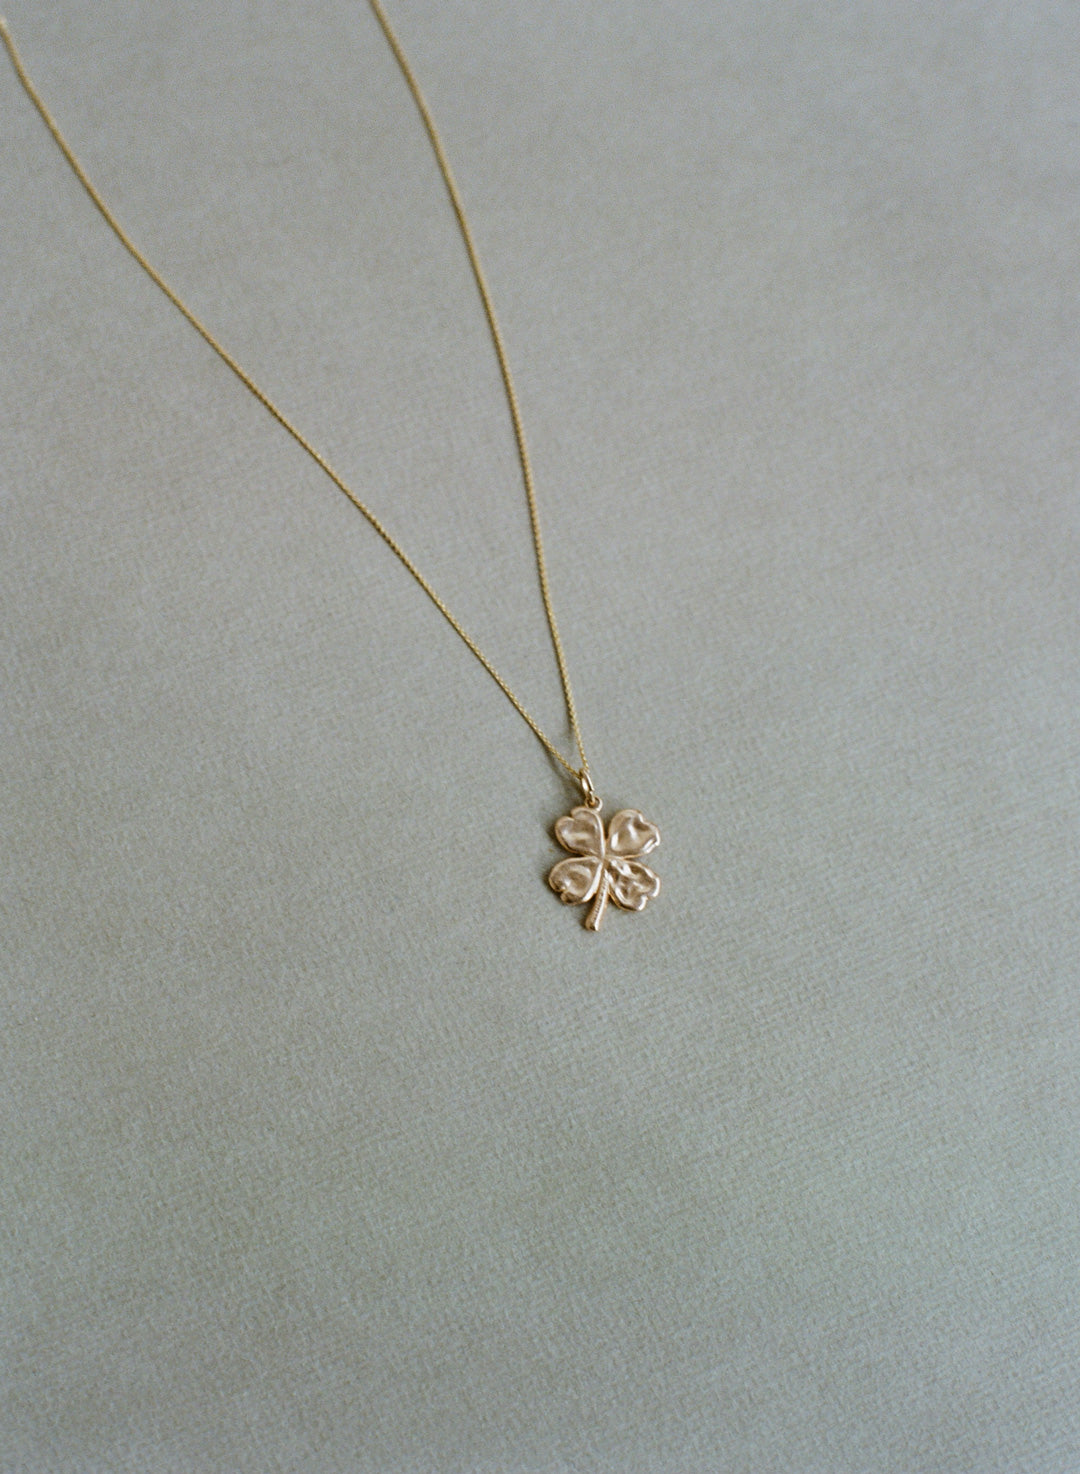 AIDA x Hypend Lucky Clover Necklace Recycled 14k Gold